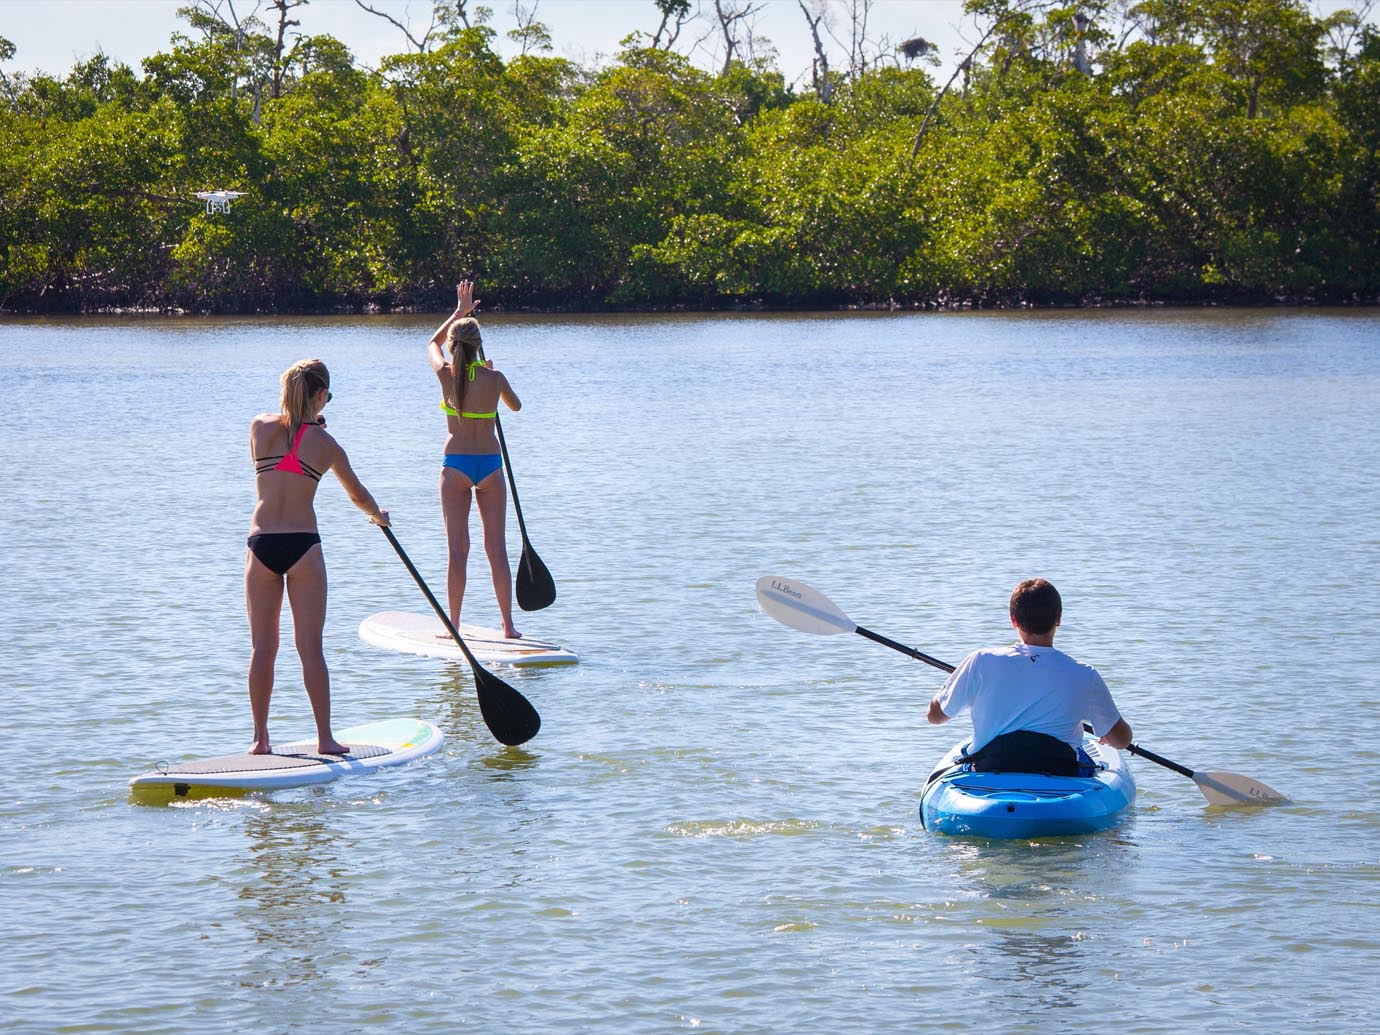 Two woman on paddle boards and a man in a blue kayak moving along through the ocean inlet in Captiva Island, FL